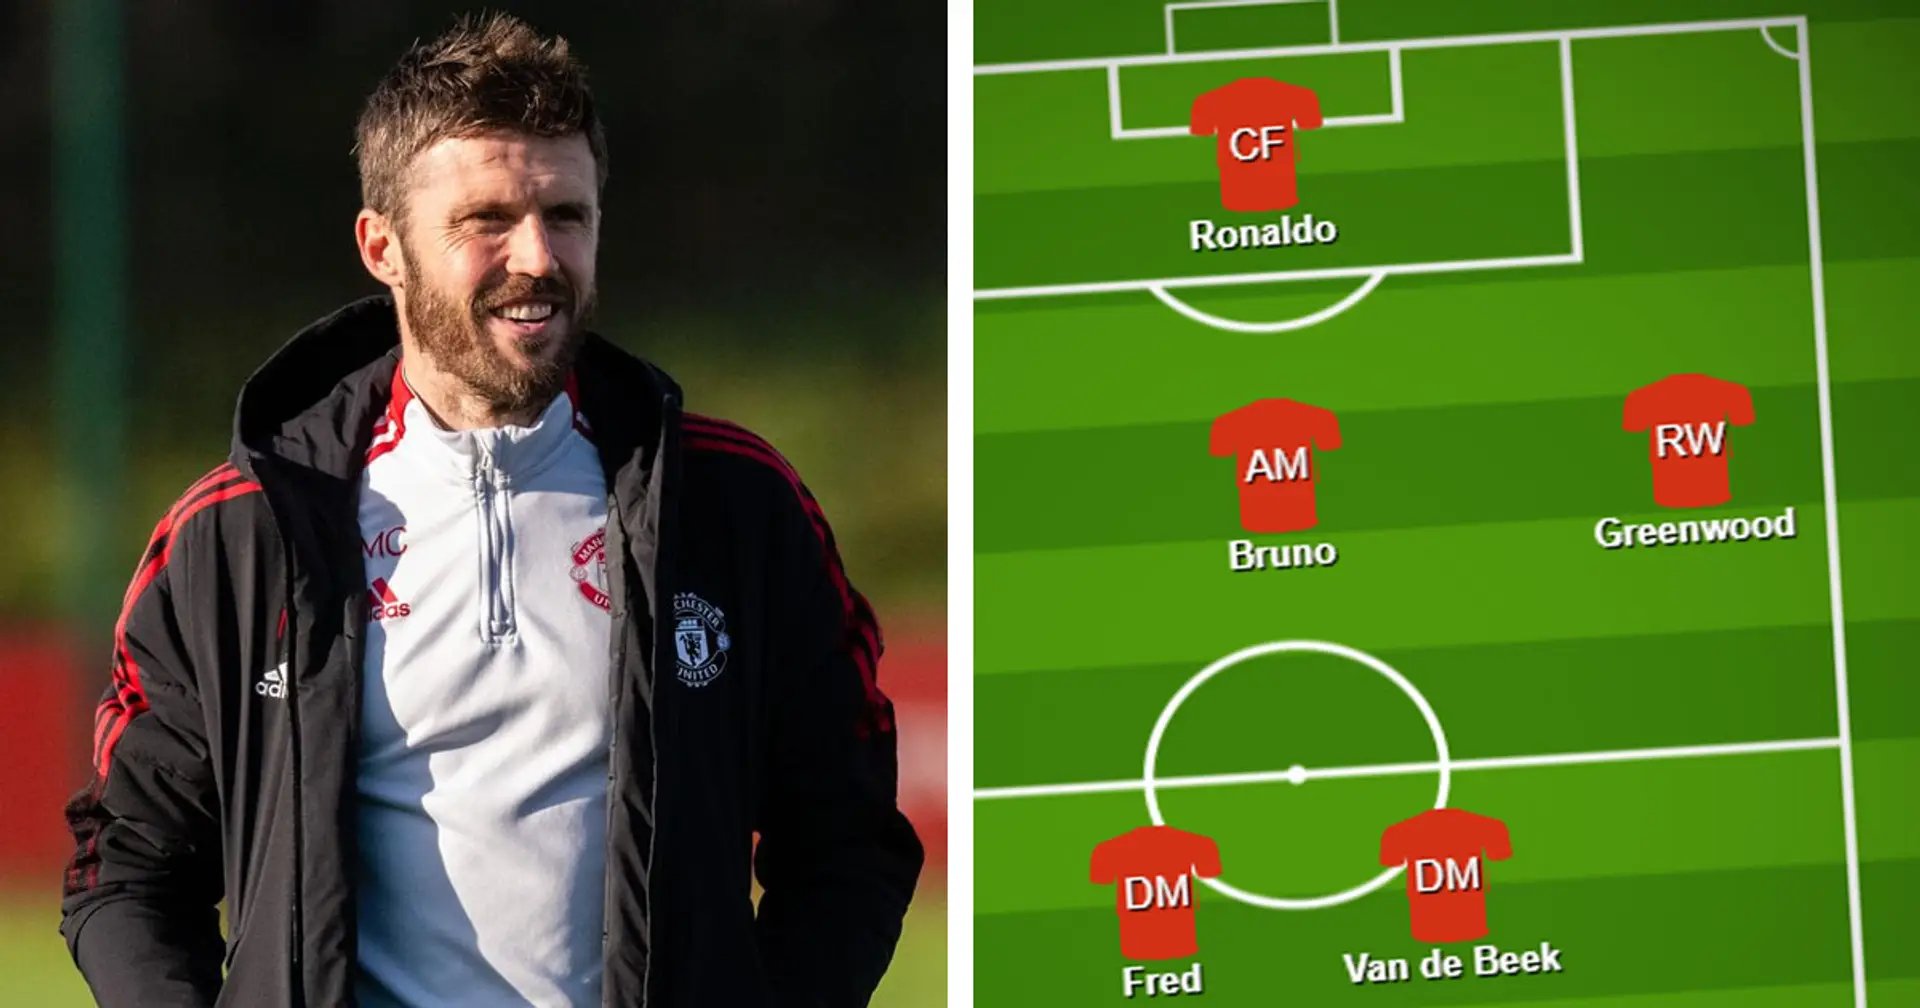 Greenwood to start? Select your favourite United XI vs Arsenal from 3 options